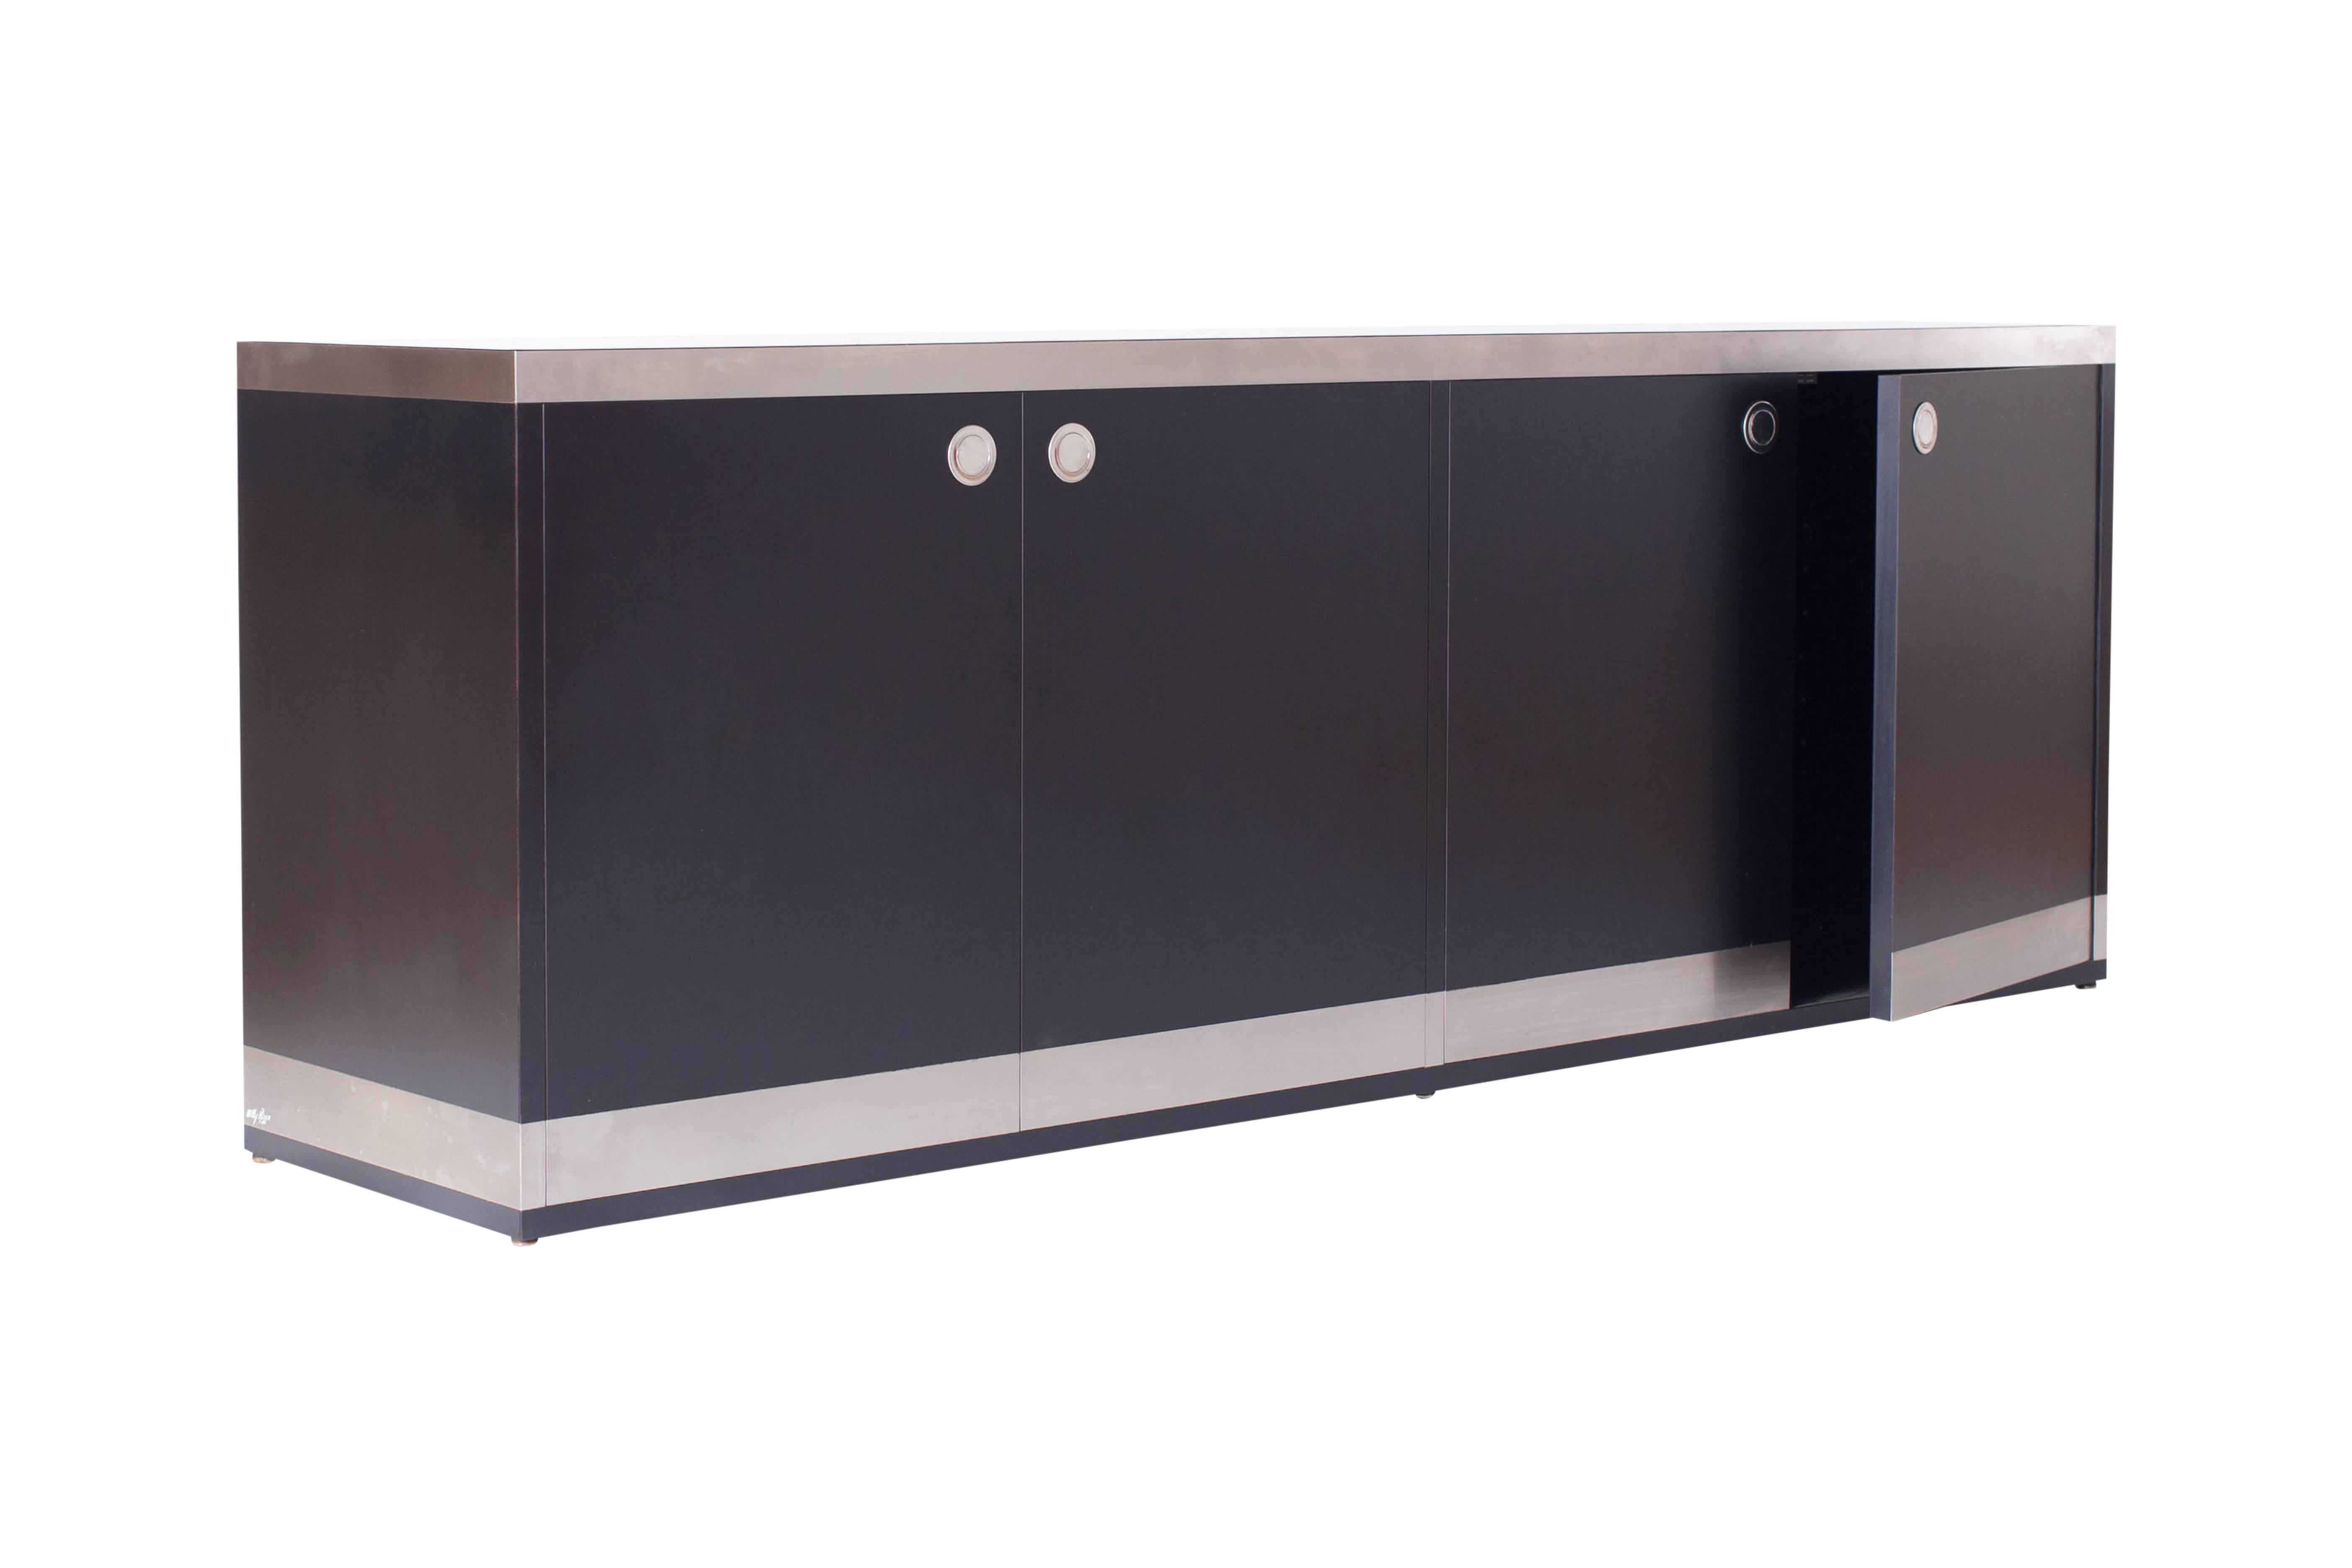 hollywood regency  sideboard in black and chrome designed and produced
by Willy Rizzo, Italy, 1970s

The cabinet is equipped with four doors, providing plenty of storage space.
The cabinet on the left holds four drawers. Note the elegant details of